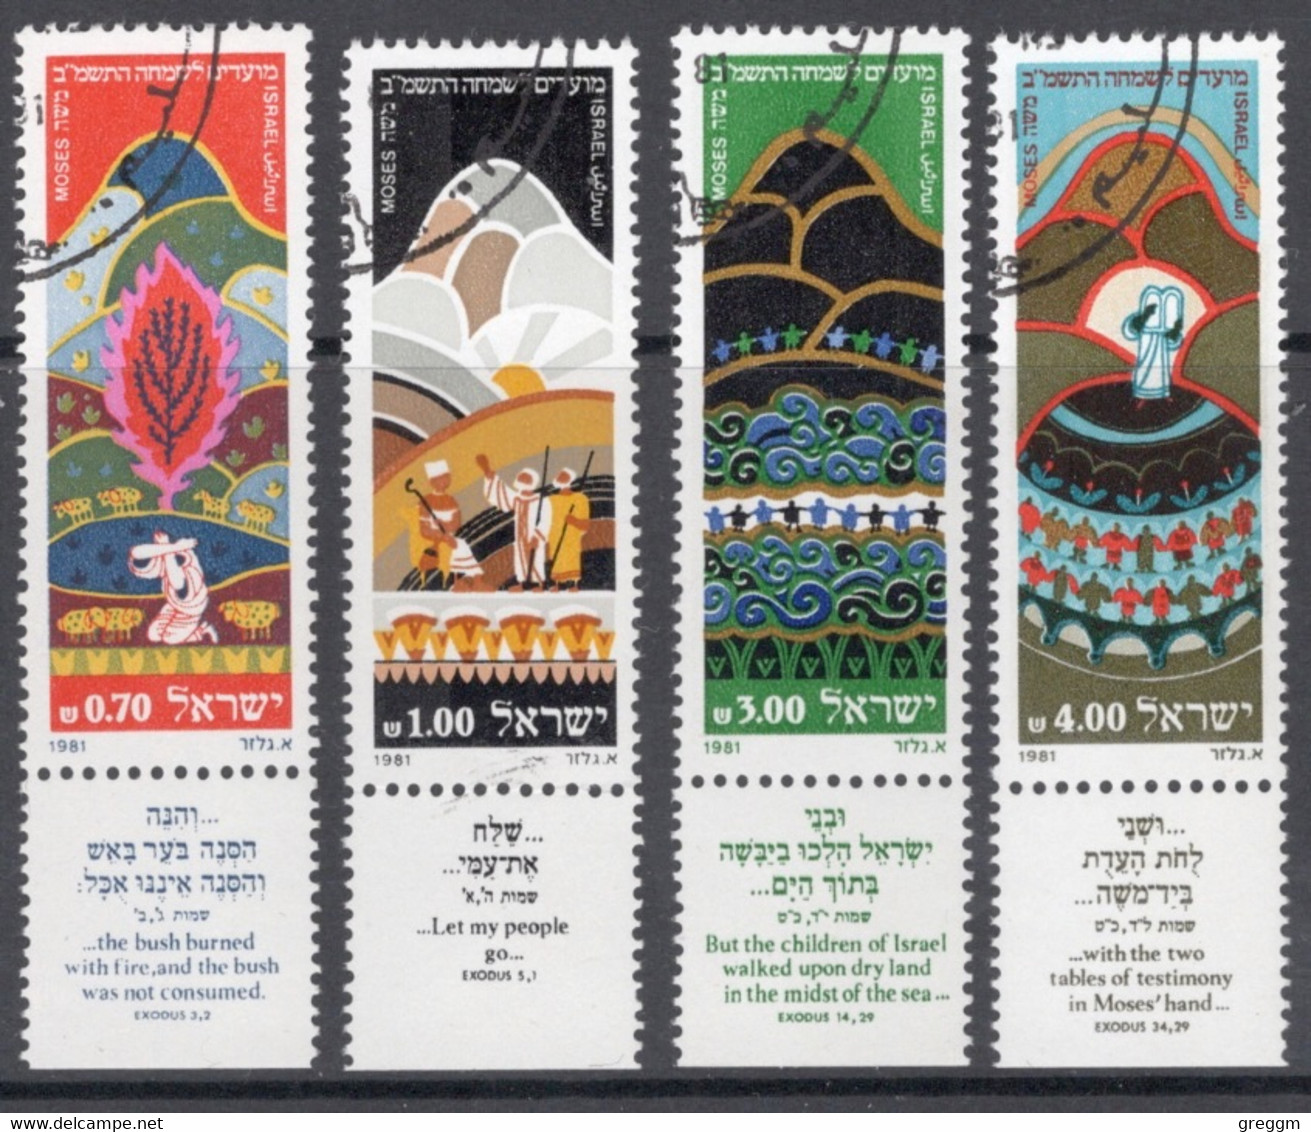 Israel 1981 Set Of Stamps Celebrating New Year In Fine Used With Tabs - Used Stamps (with Tabs)